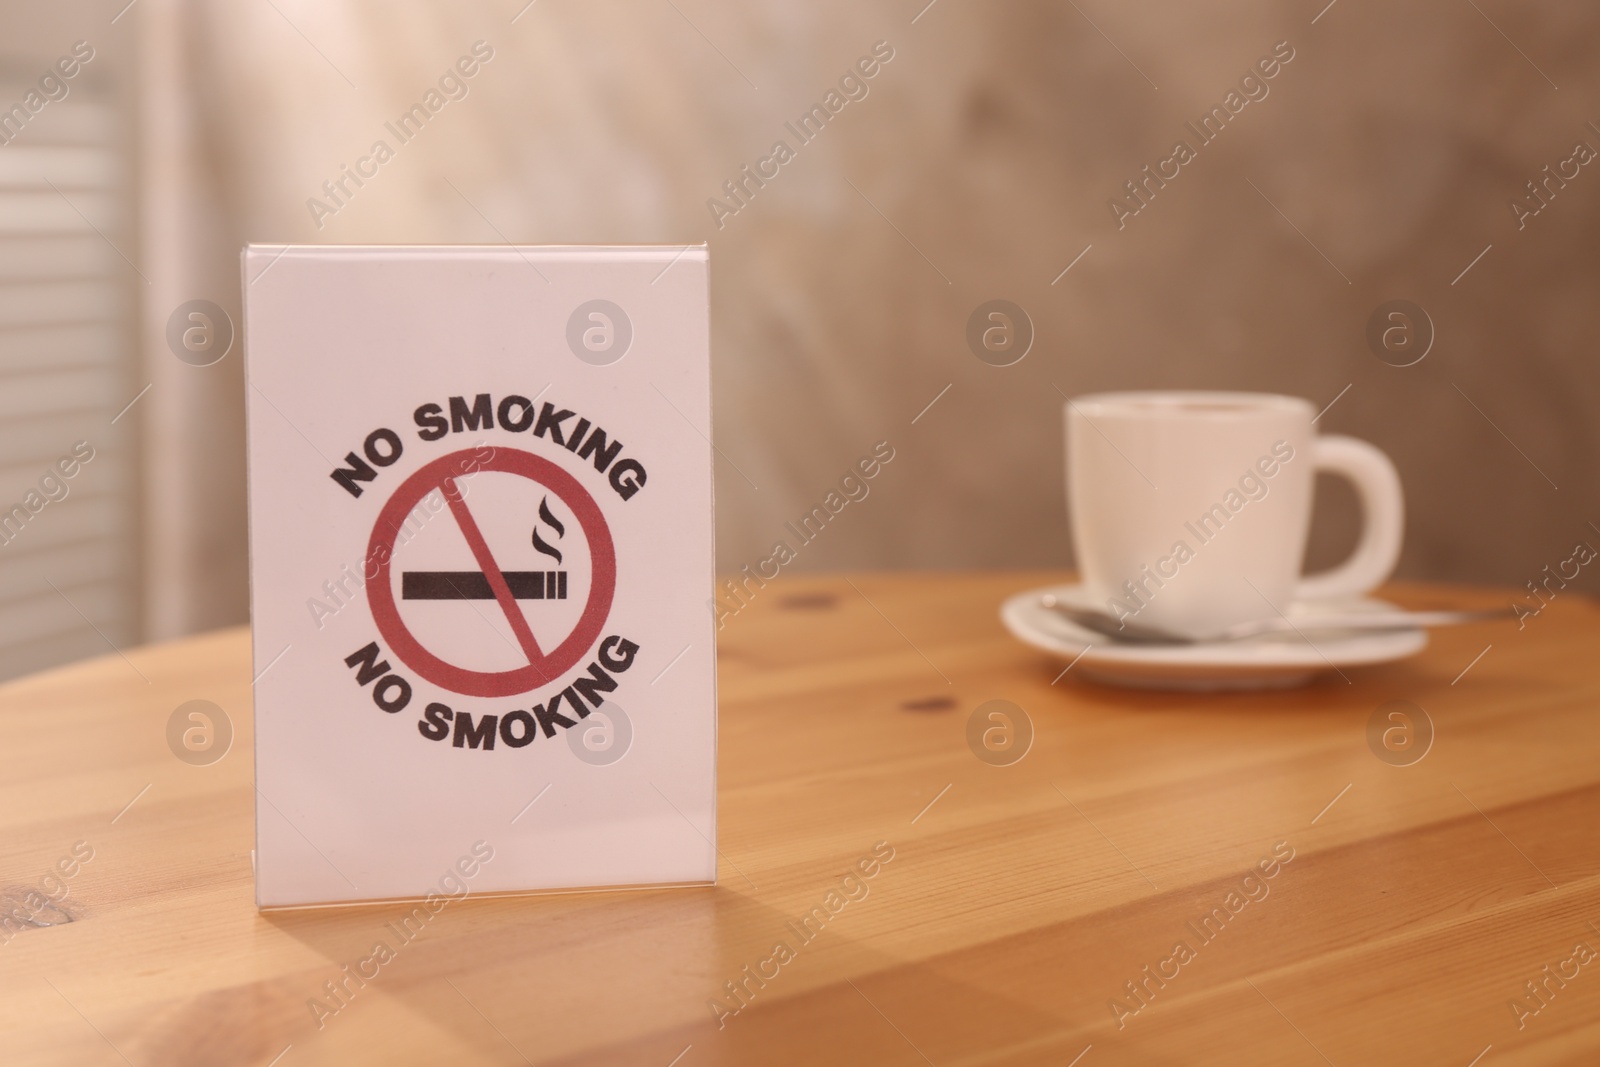 Photo of No Smoking sign and cup of drink on wooden table indoors, selective focus